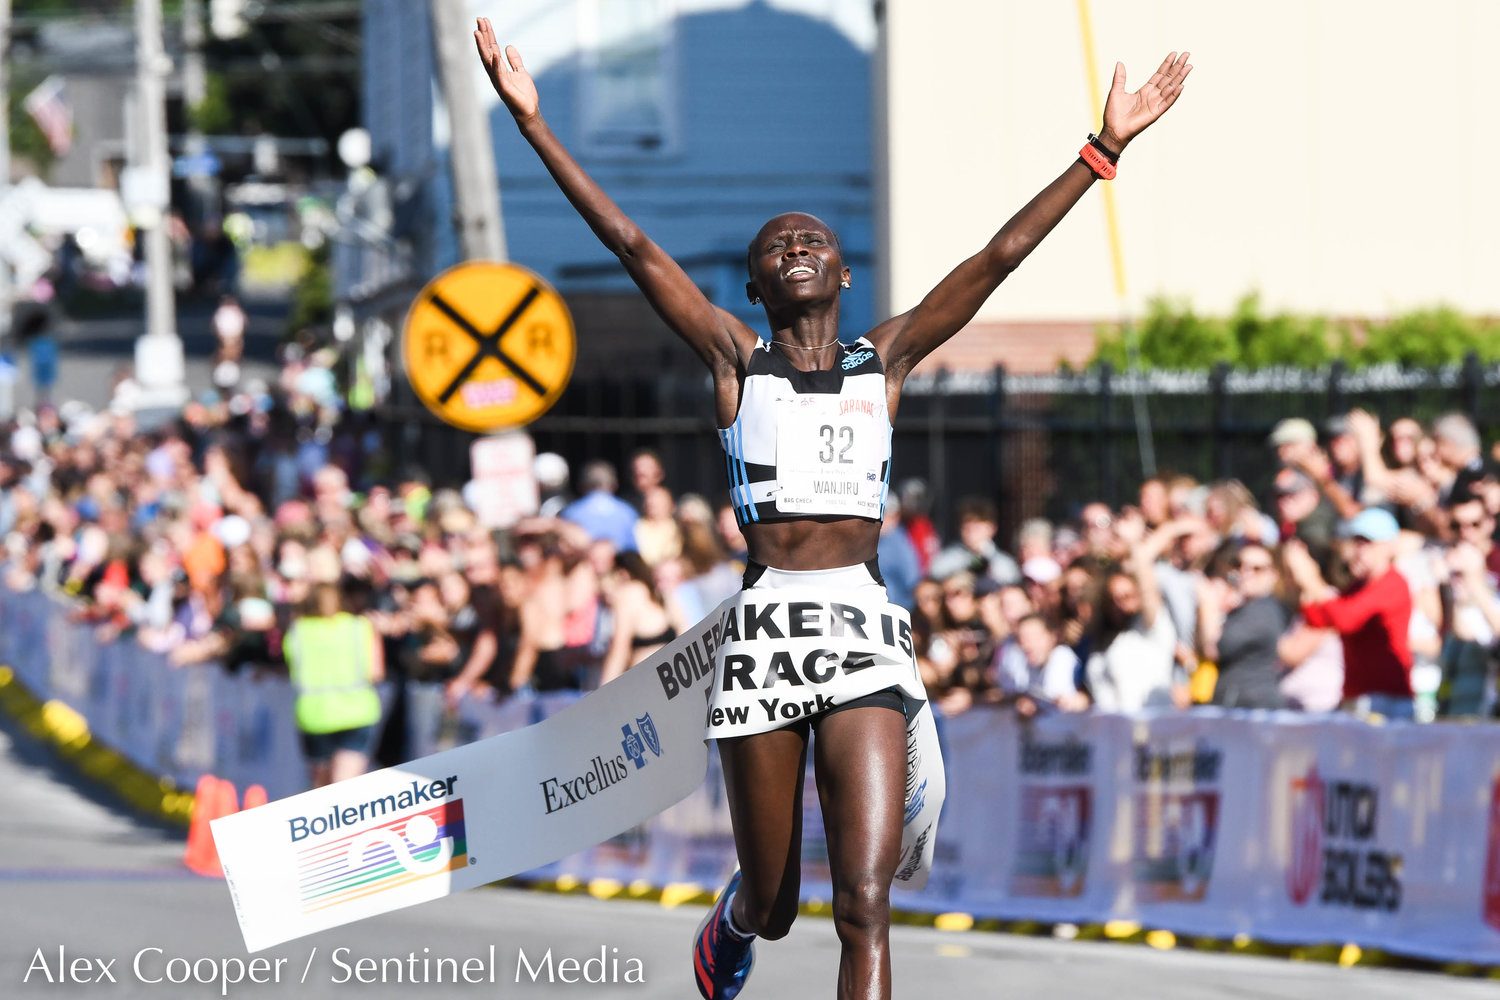 Rosemary Wanjiru celebrates after finishing 1st in the women's 15K during the 45th Boilermaker Road Race on Sunday, July 10 in Utica.